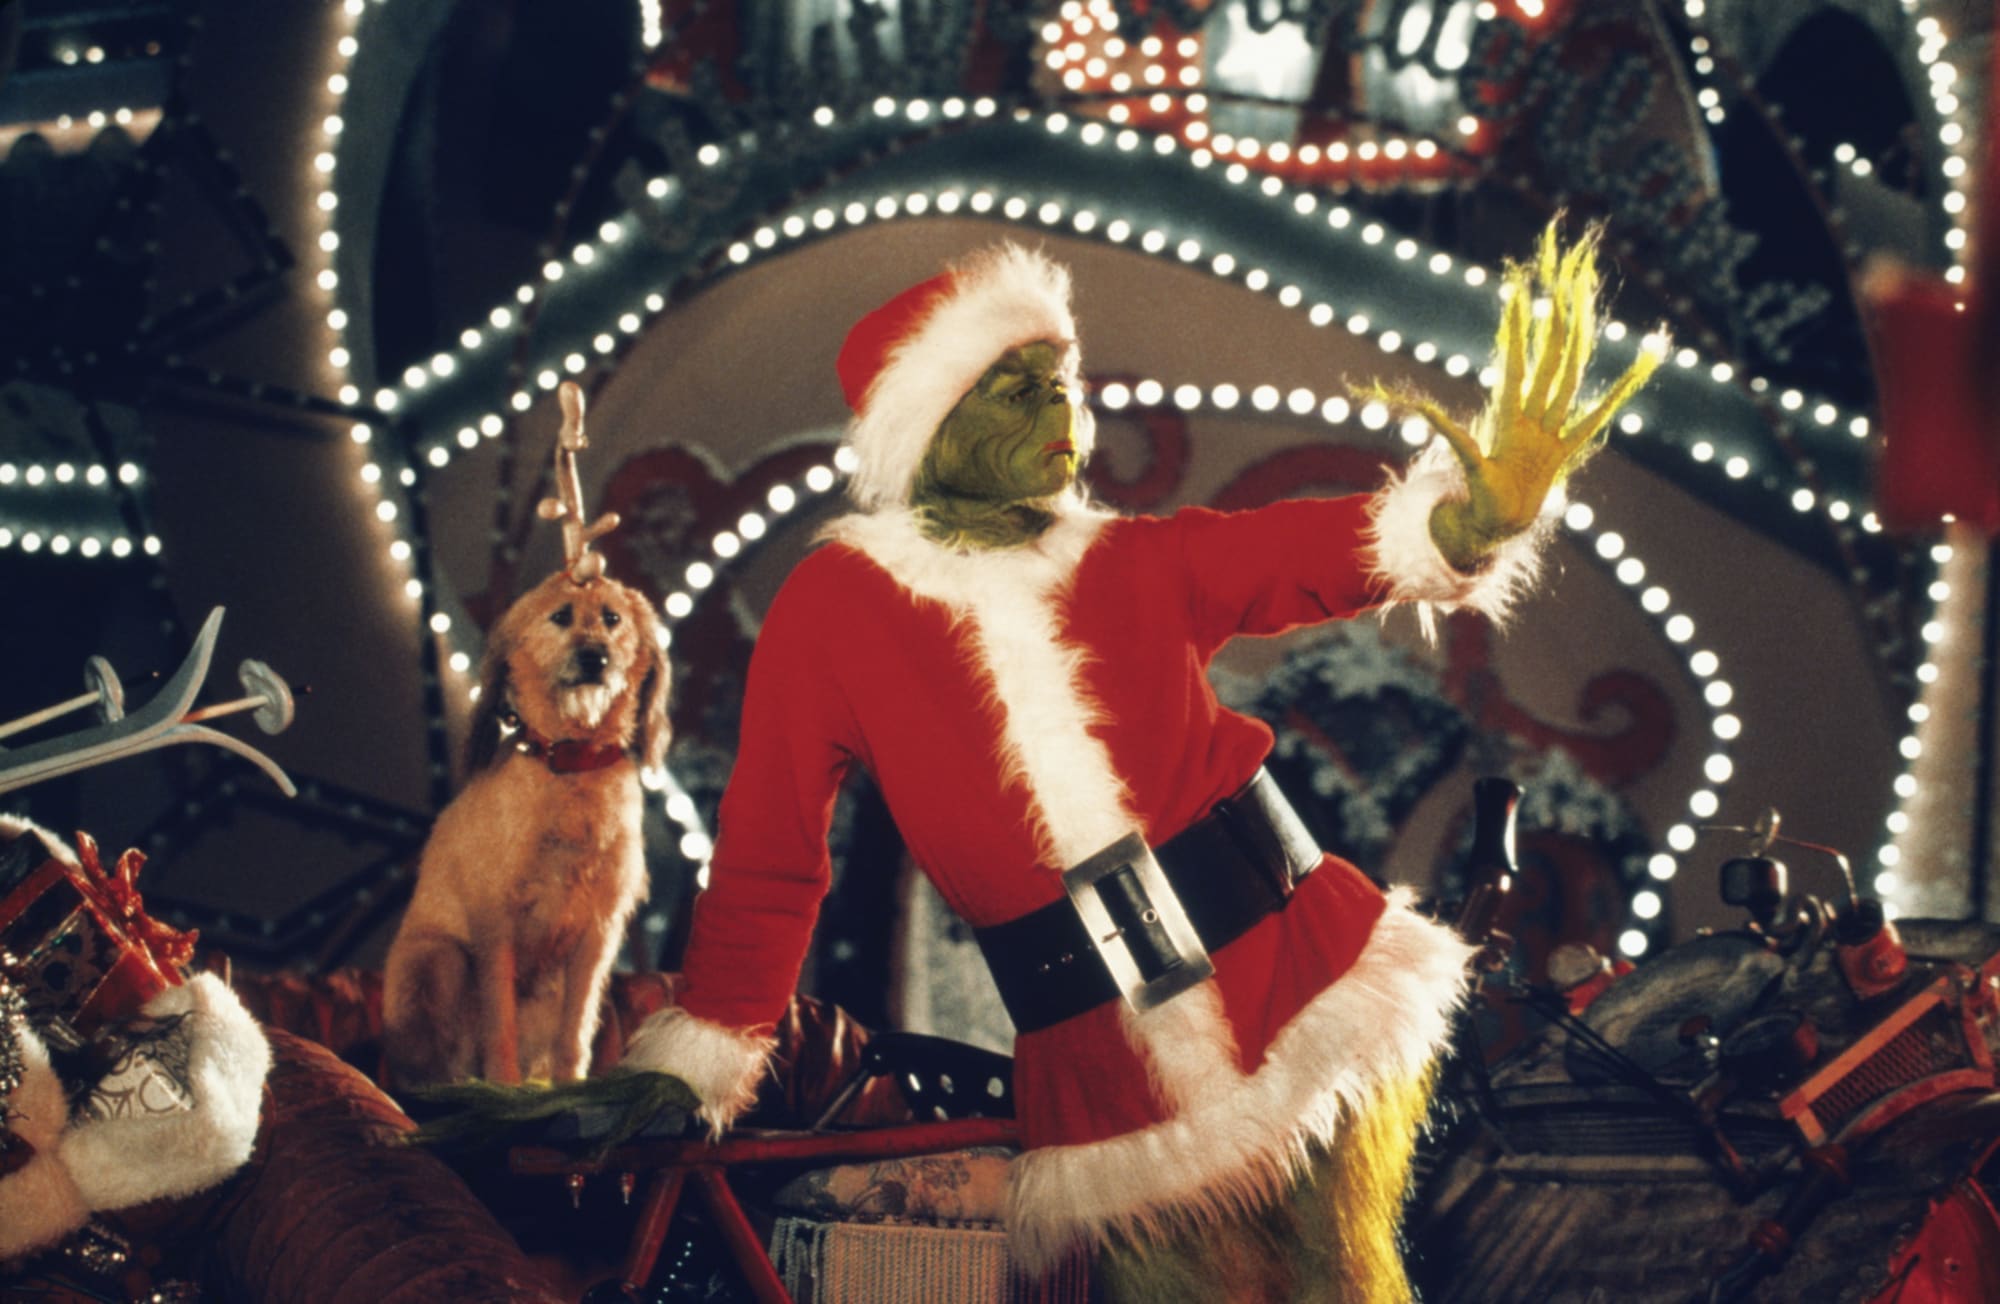 Where is How the Grinch Stole Christmas streaming in 2022?